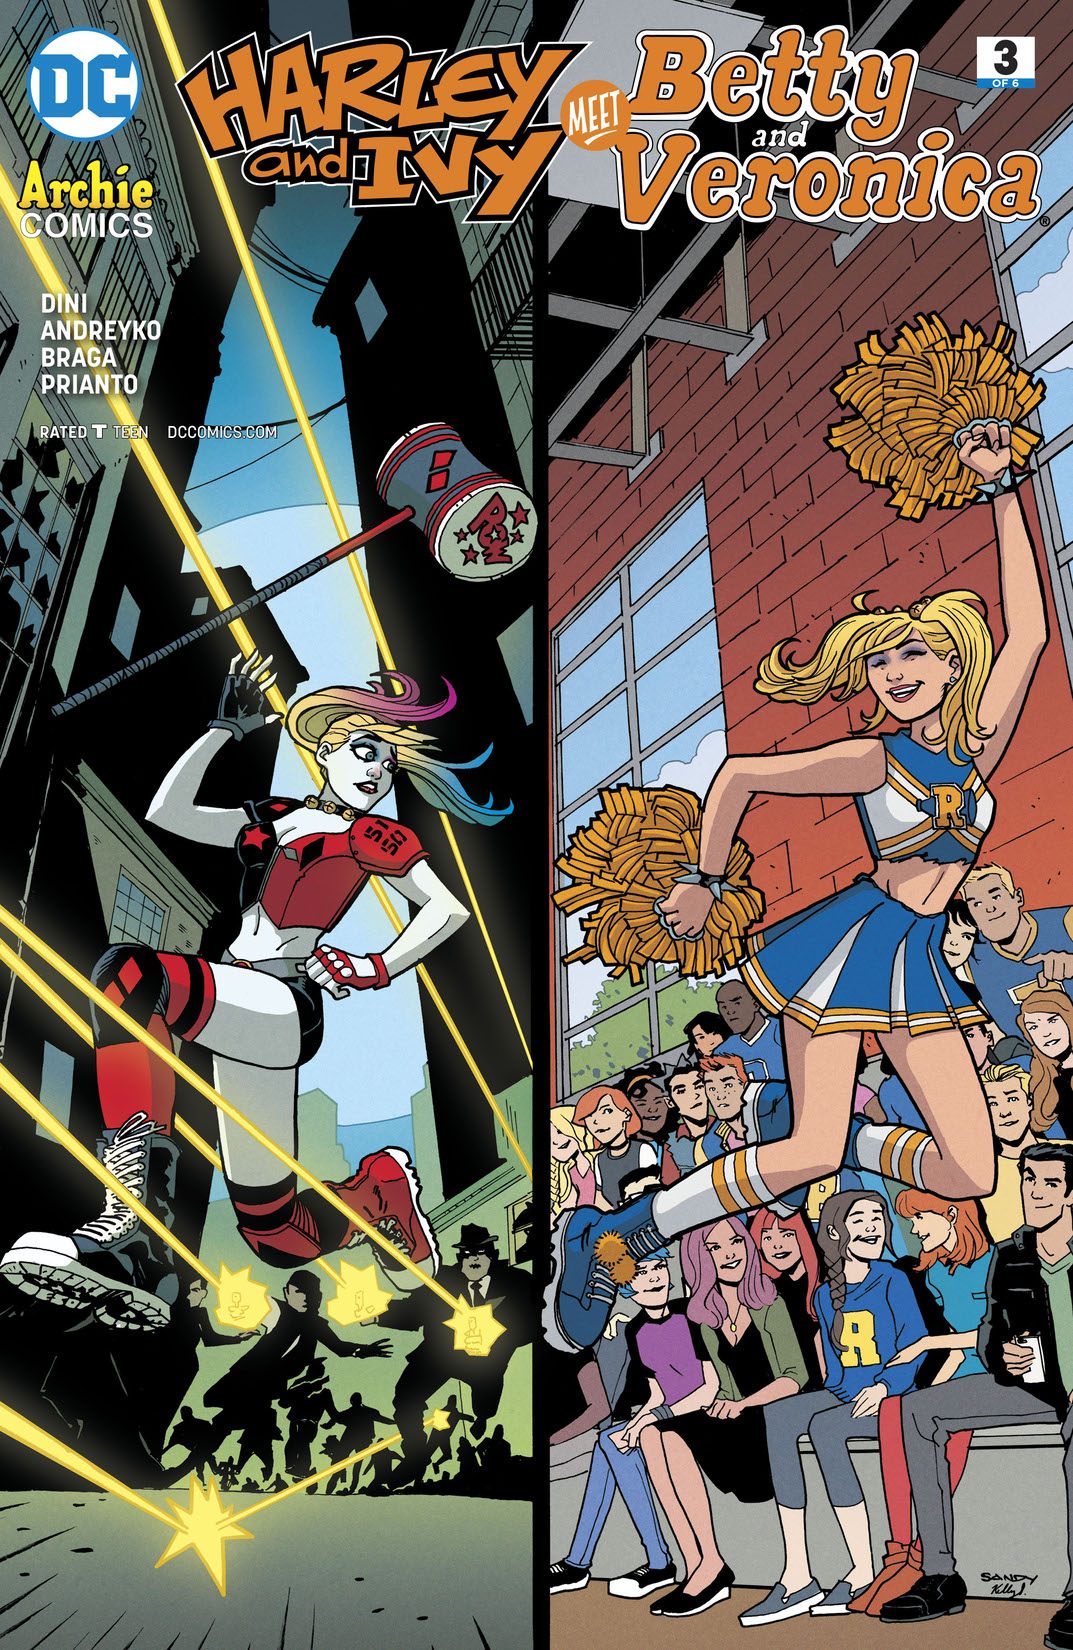 Harley & Ivy Meet Betty and Veronica #3 preview images